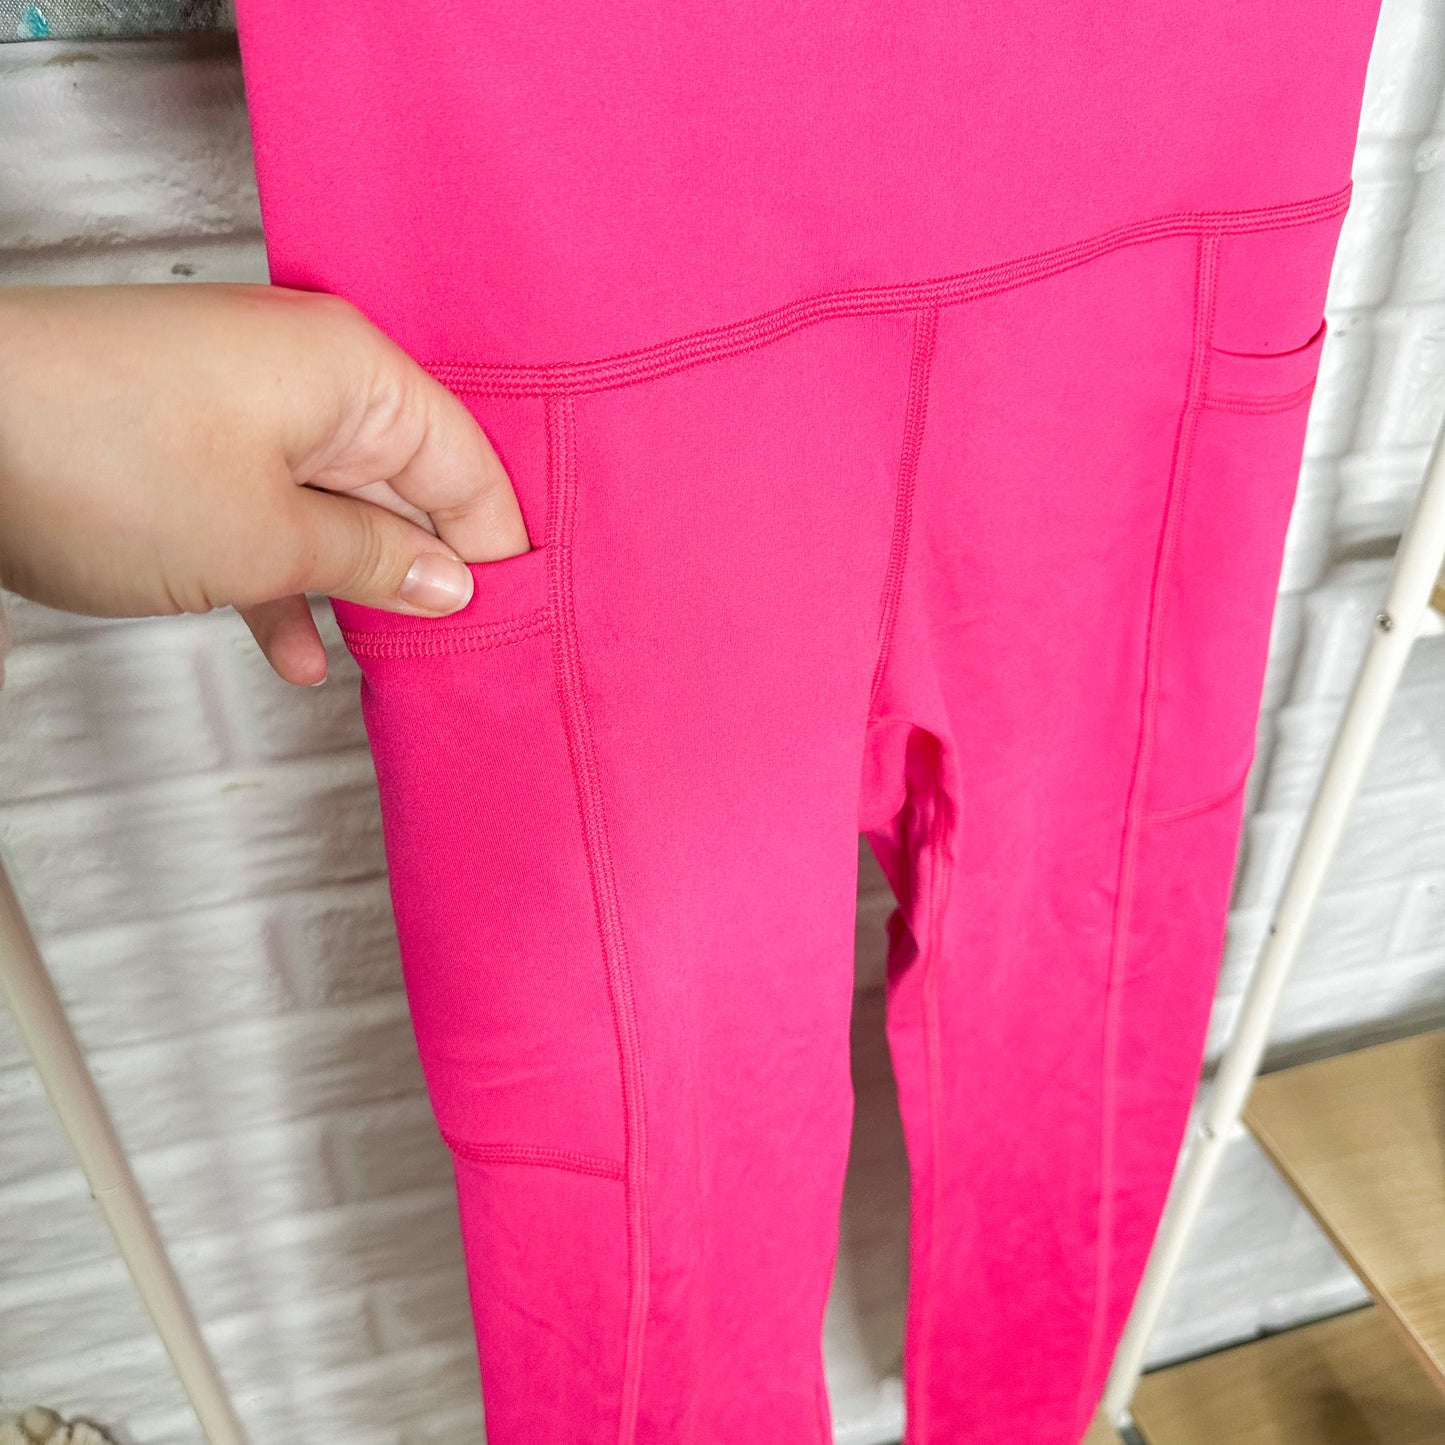 Hollister Gilly Hicks New Pink Recharge High Rise Leggings Size Medium Long